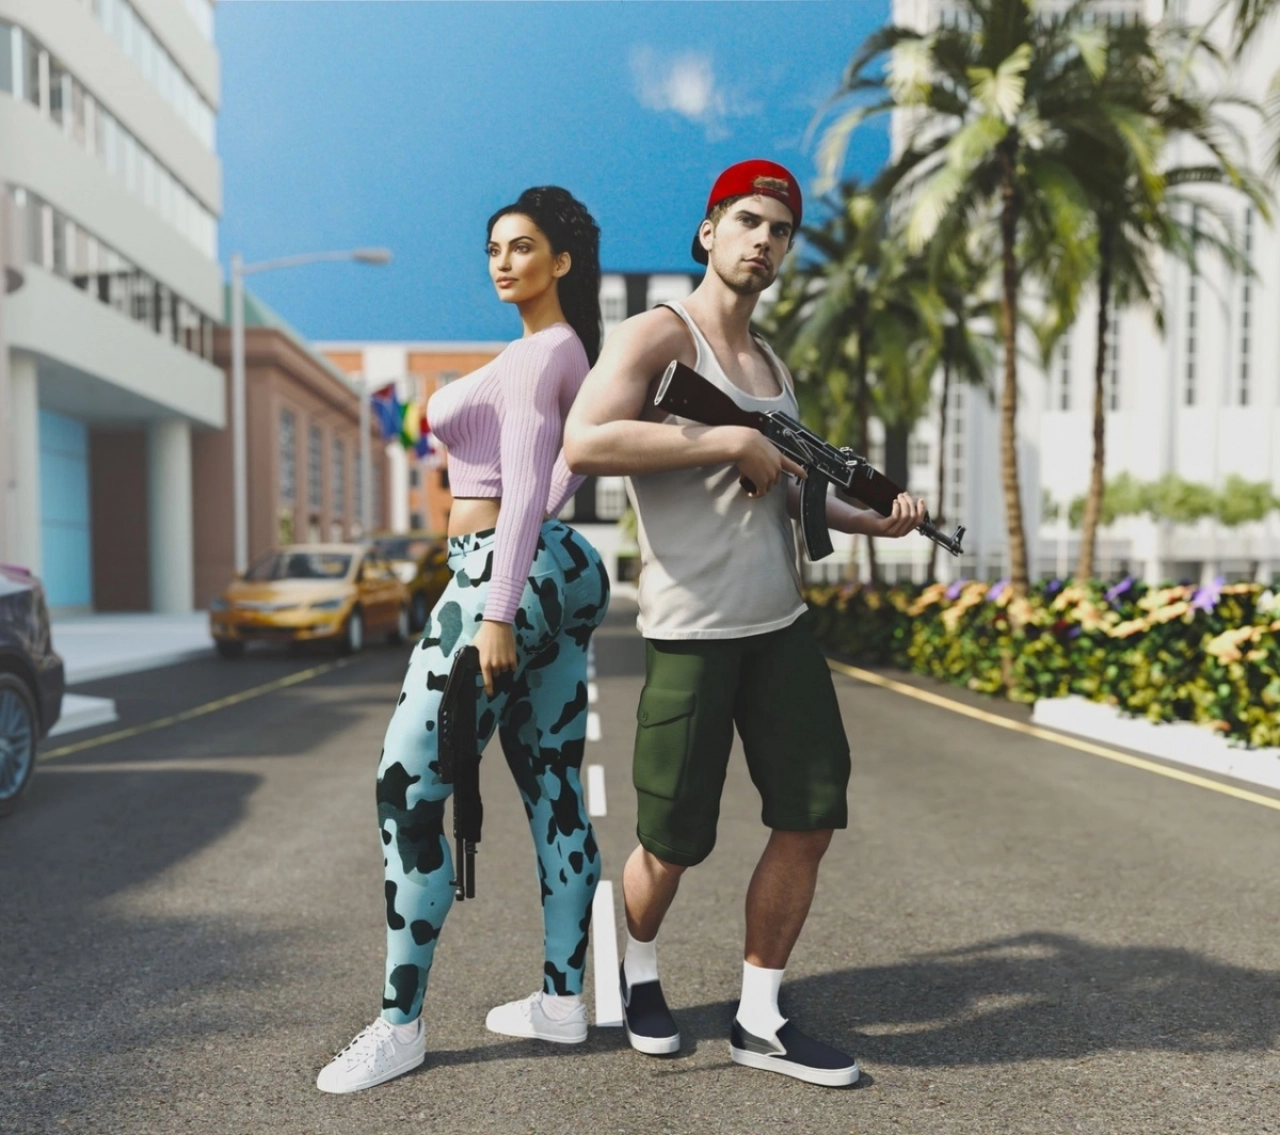 Jason And Lucia Render With Weapons